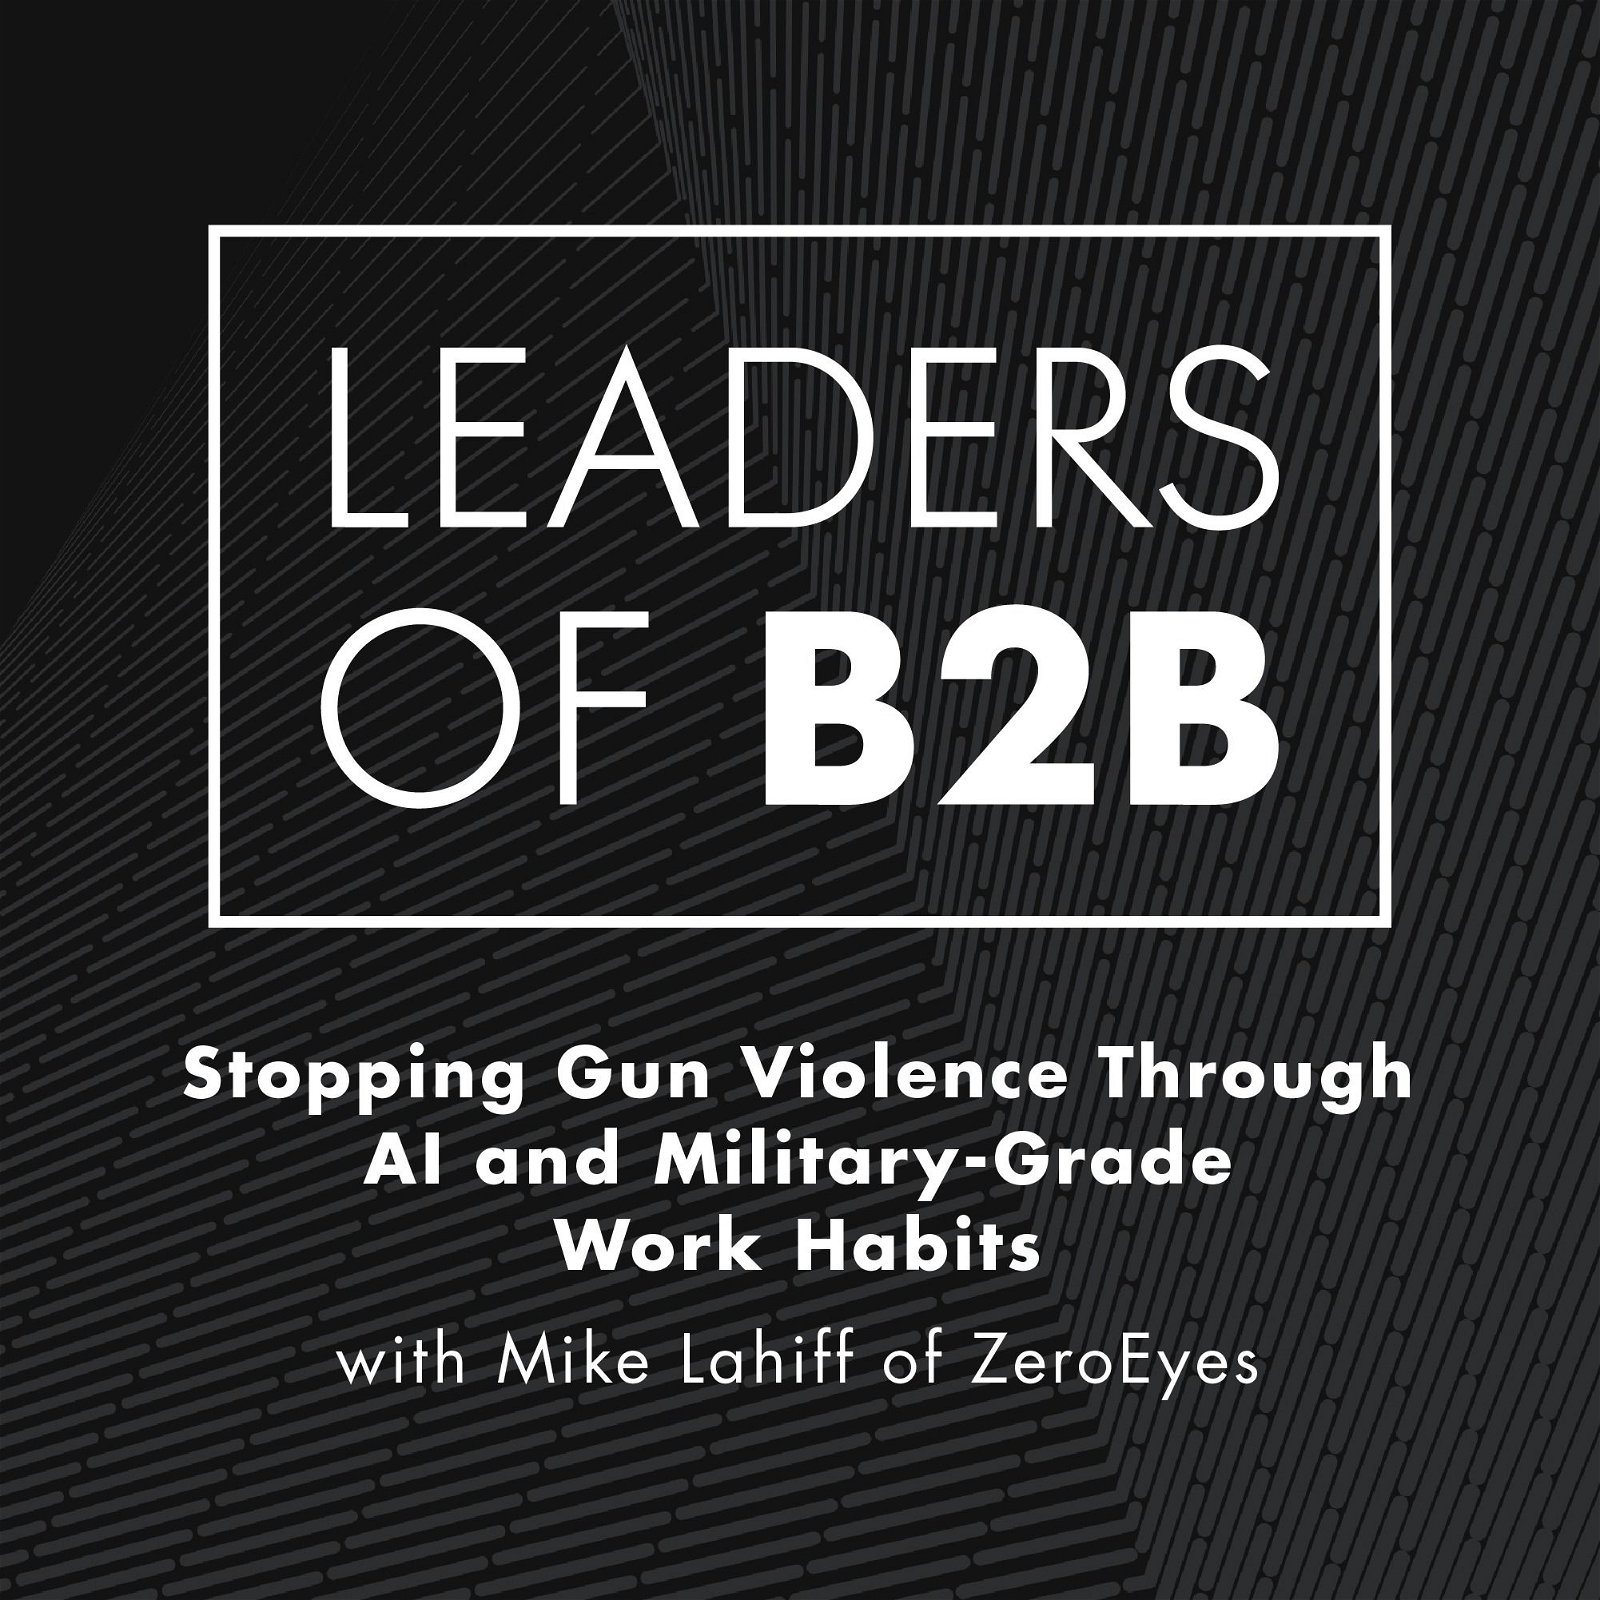 Stopping Gun Violence Through AI and Military-Grade Work Habits with Mike Lahiff of ZeroEyes